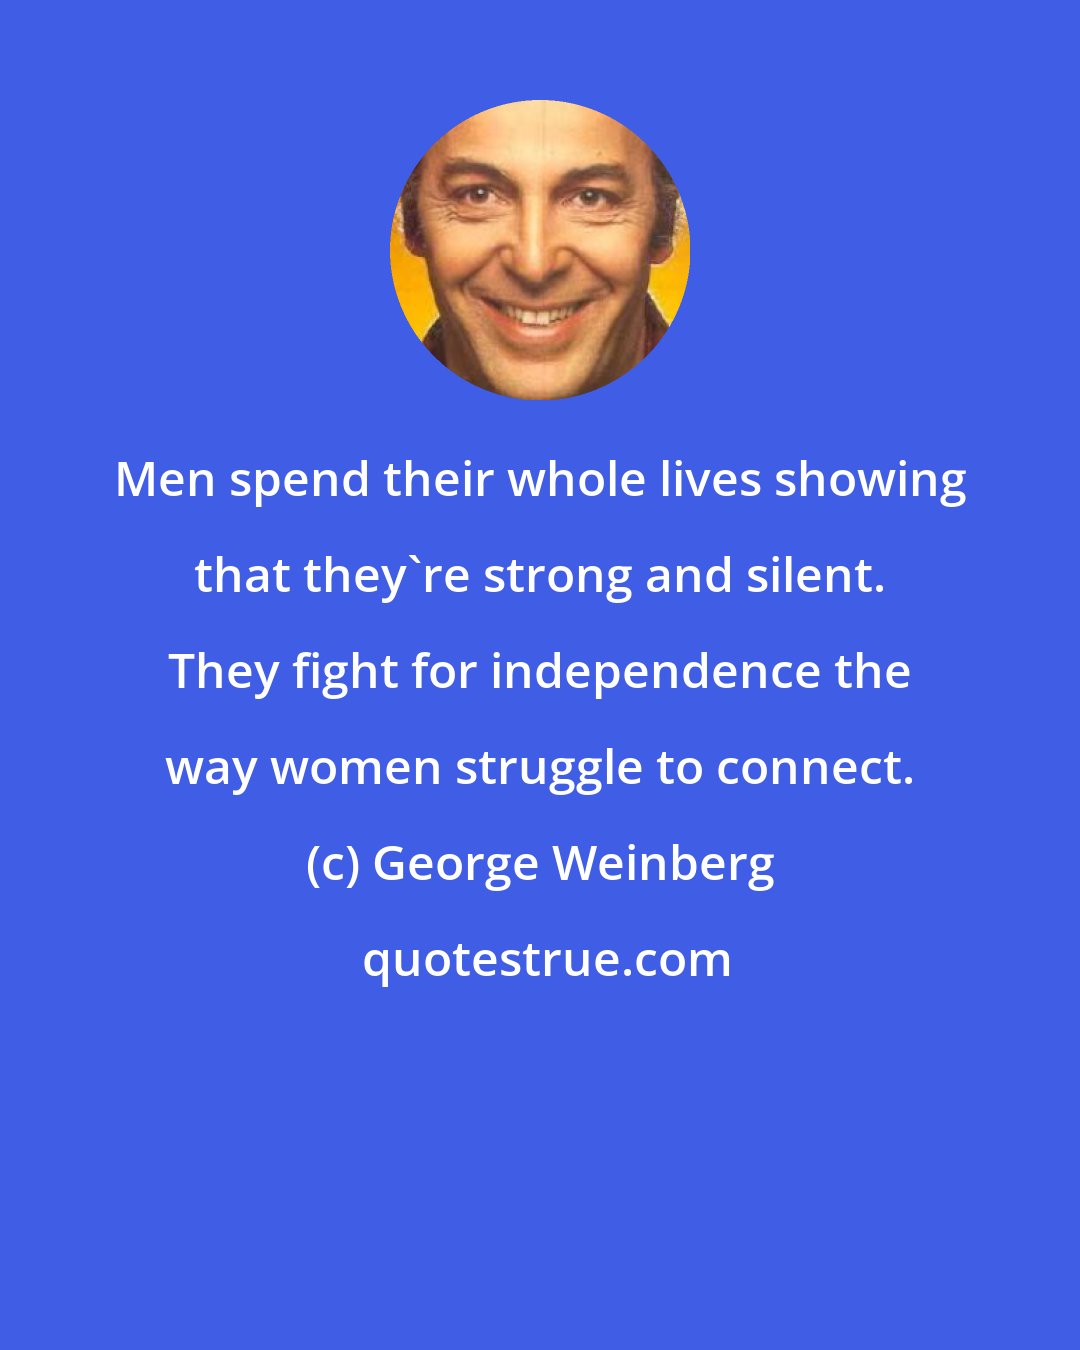 George Weinberg: Men spend their whole lives showing that they're strong and silent. They fight for independence the way women struggle to connect.